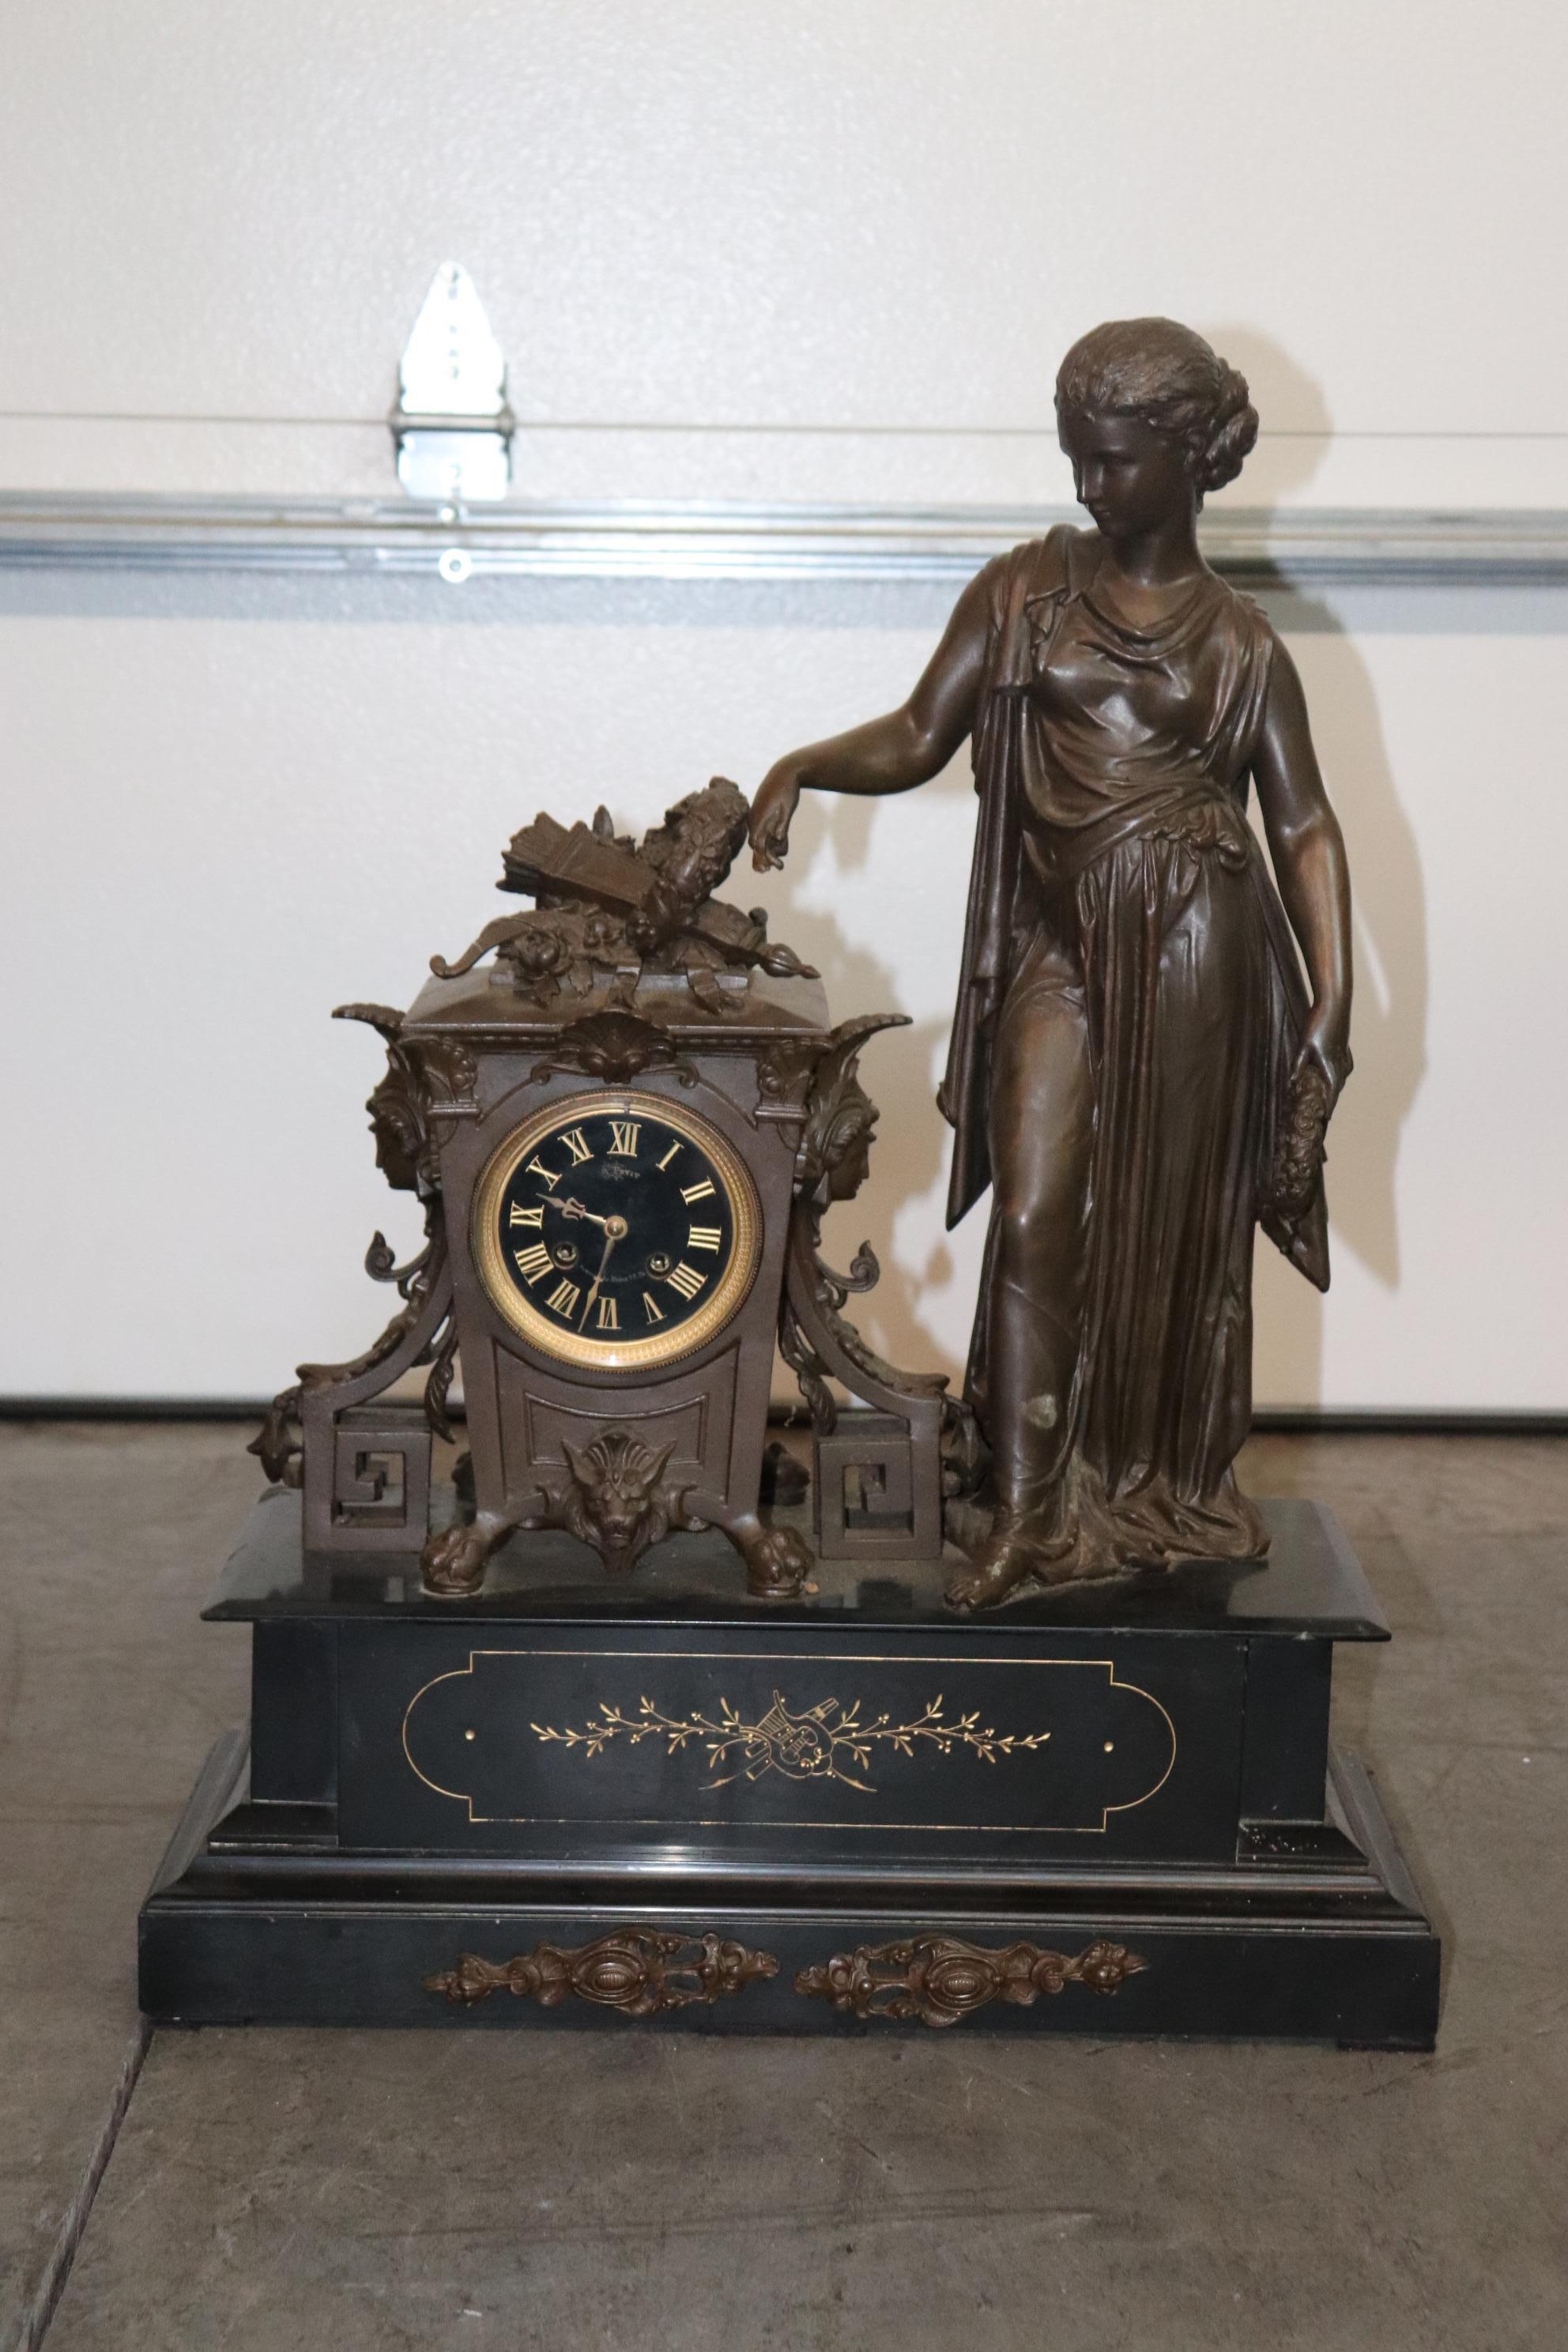 This is a superbly cast figural signed A.Petit mantle clock. The figure is expertly cast and looks like something Belluse would;ve done. The patina is beautiful and the closk just has that gravitas that you are searching for when chooing a mantle